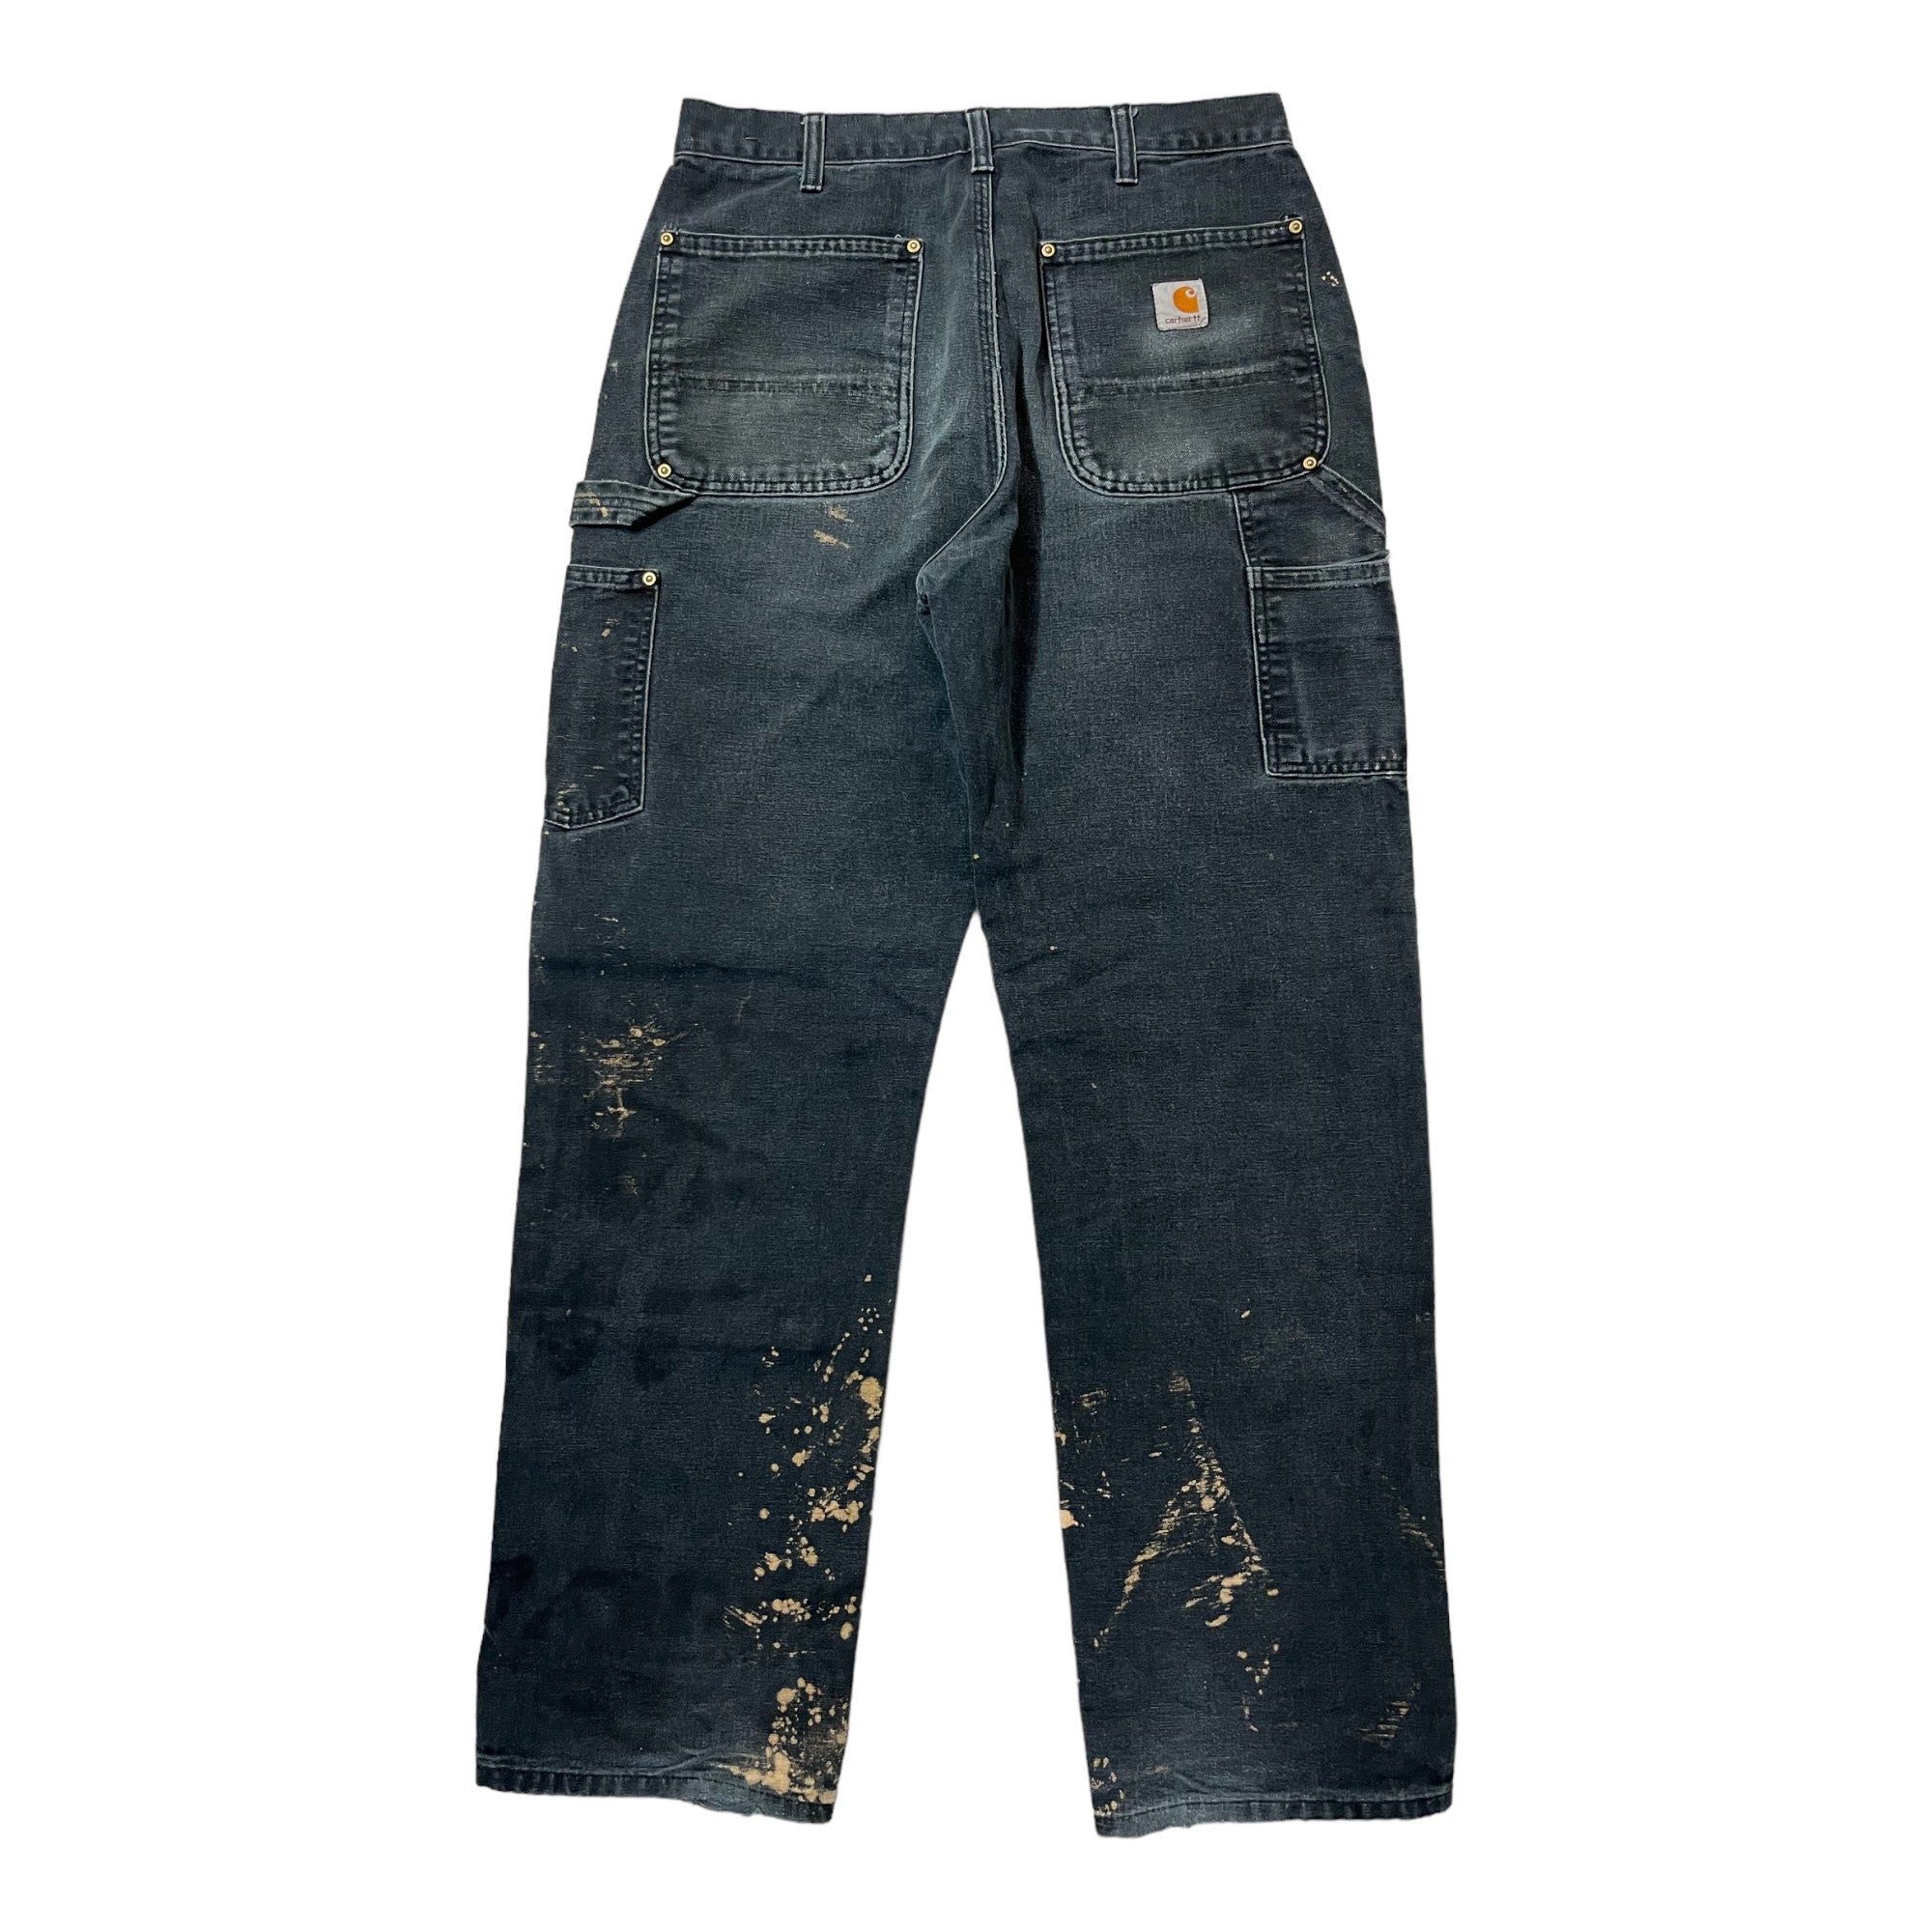 1980s Carhartt Double Knees With Distressing and Bleach Marks - Faded Black  - 30x31